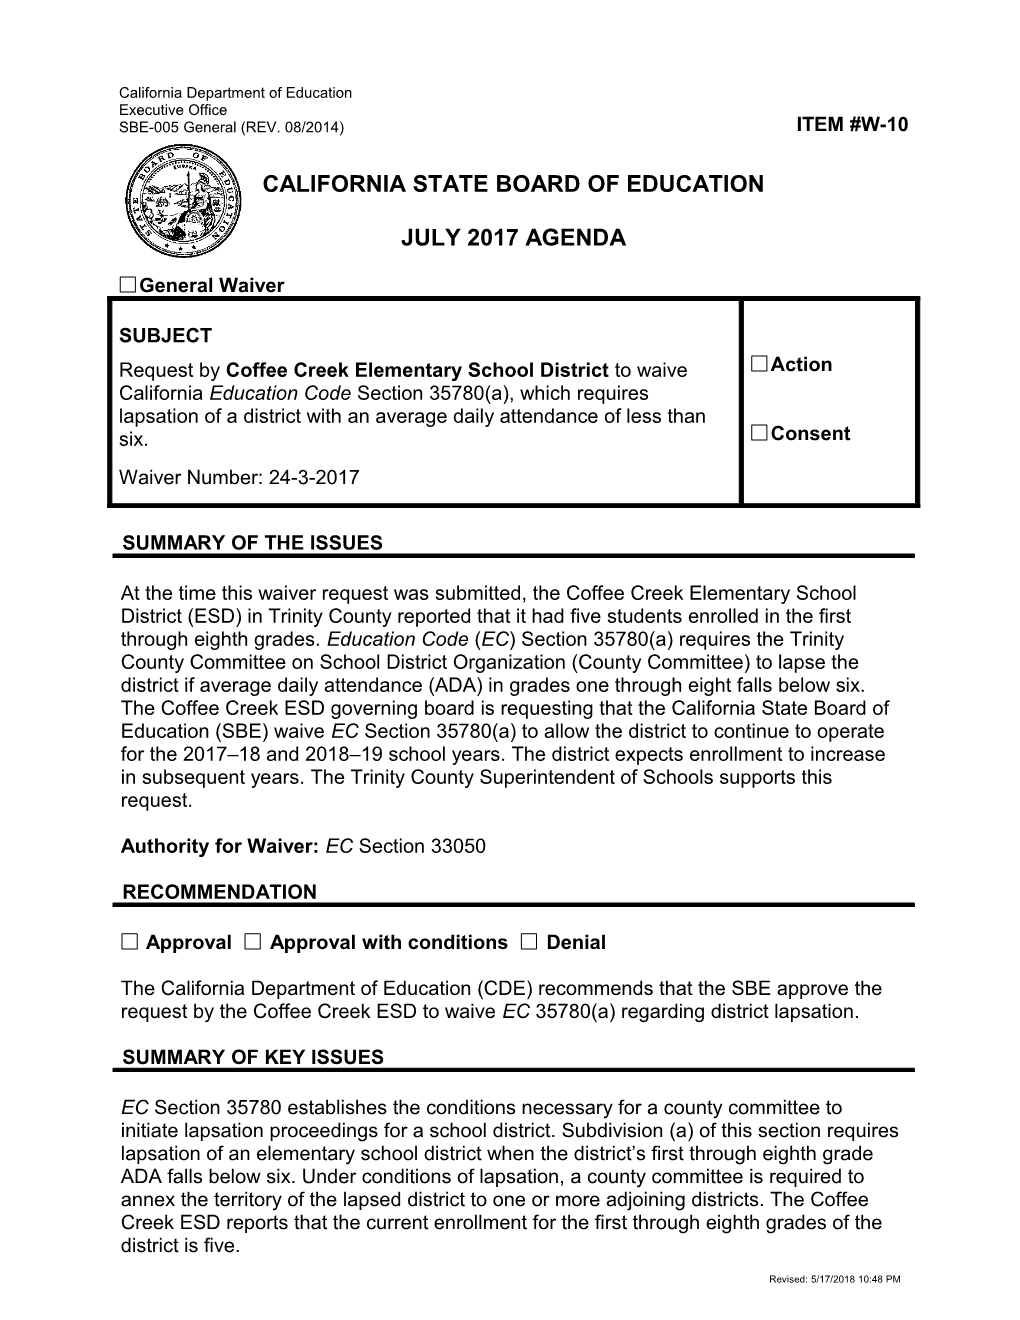 July 2017 Waiver Item W-10 - Meeting Agendas (CA State Board of Education) s1